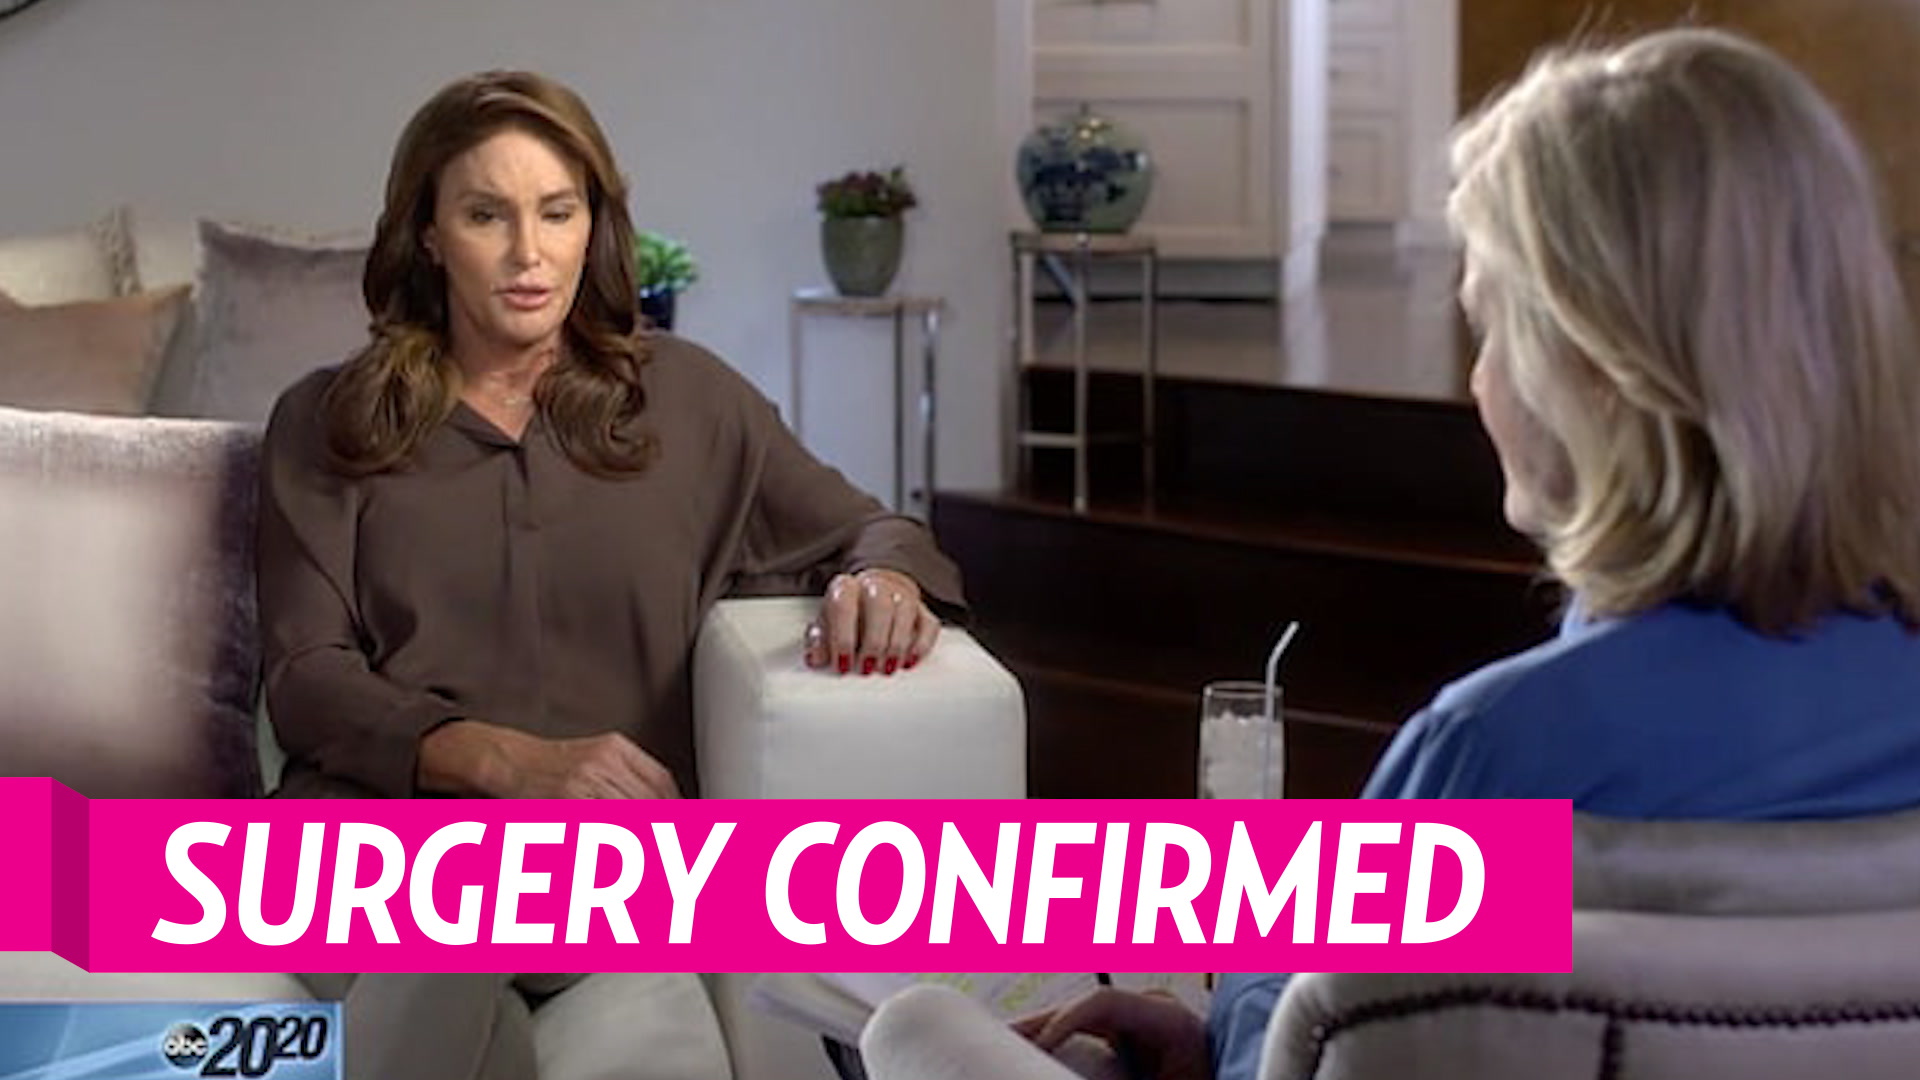 Caitlyn Jenner Confirms Gender Reassignment Surgery on '20/20'